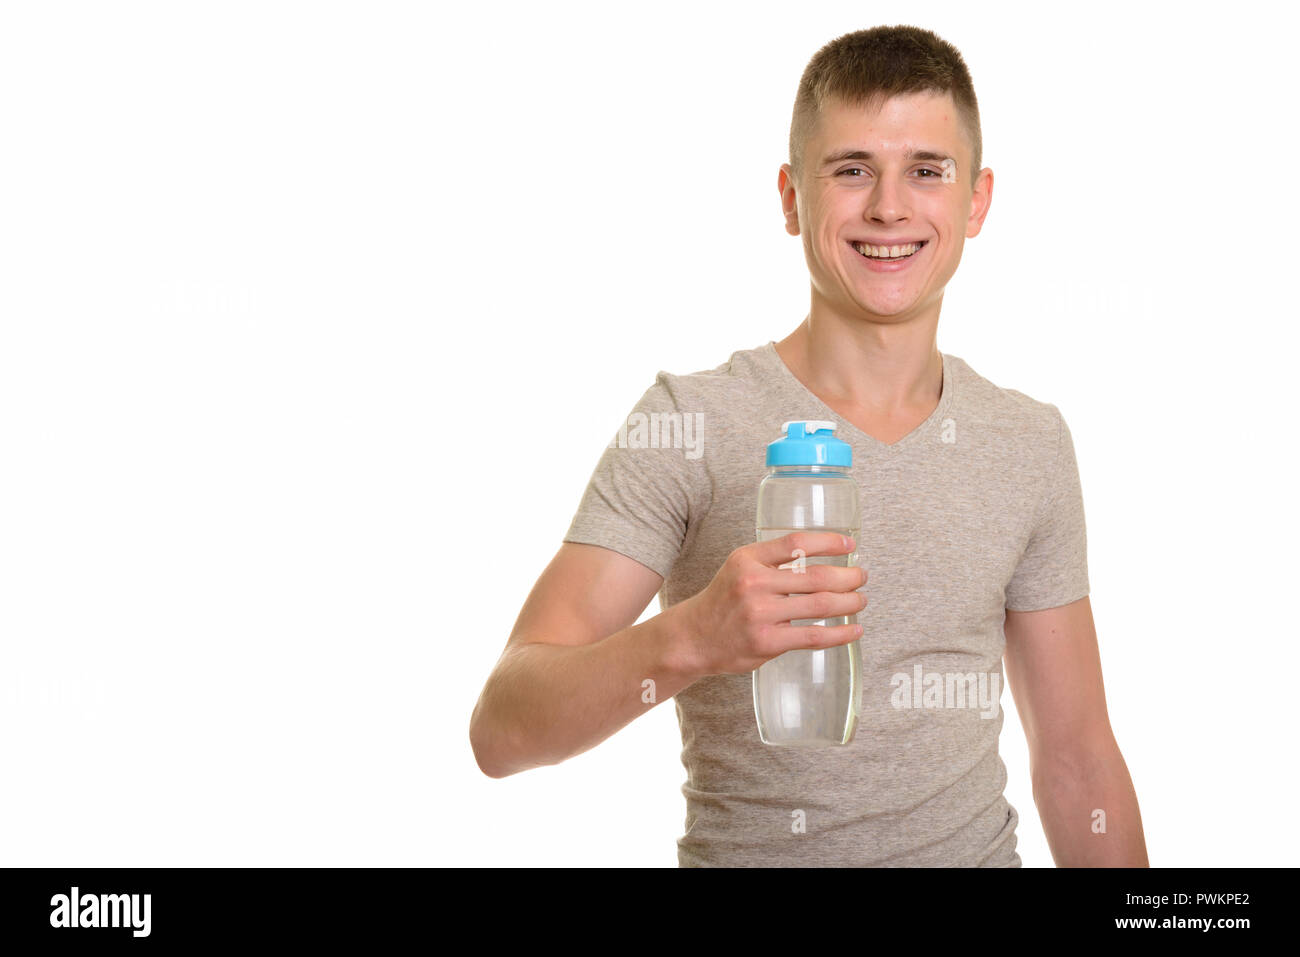 Young happy man smiling and holding water bottle Banque D'Images